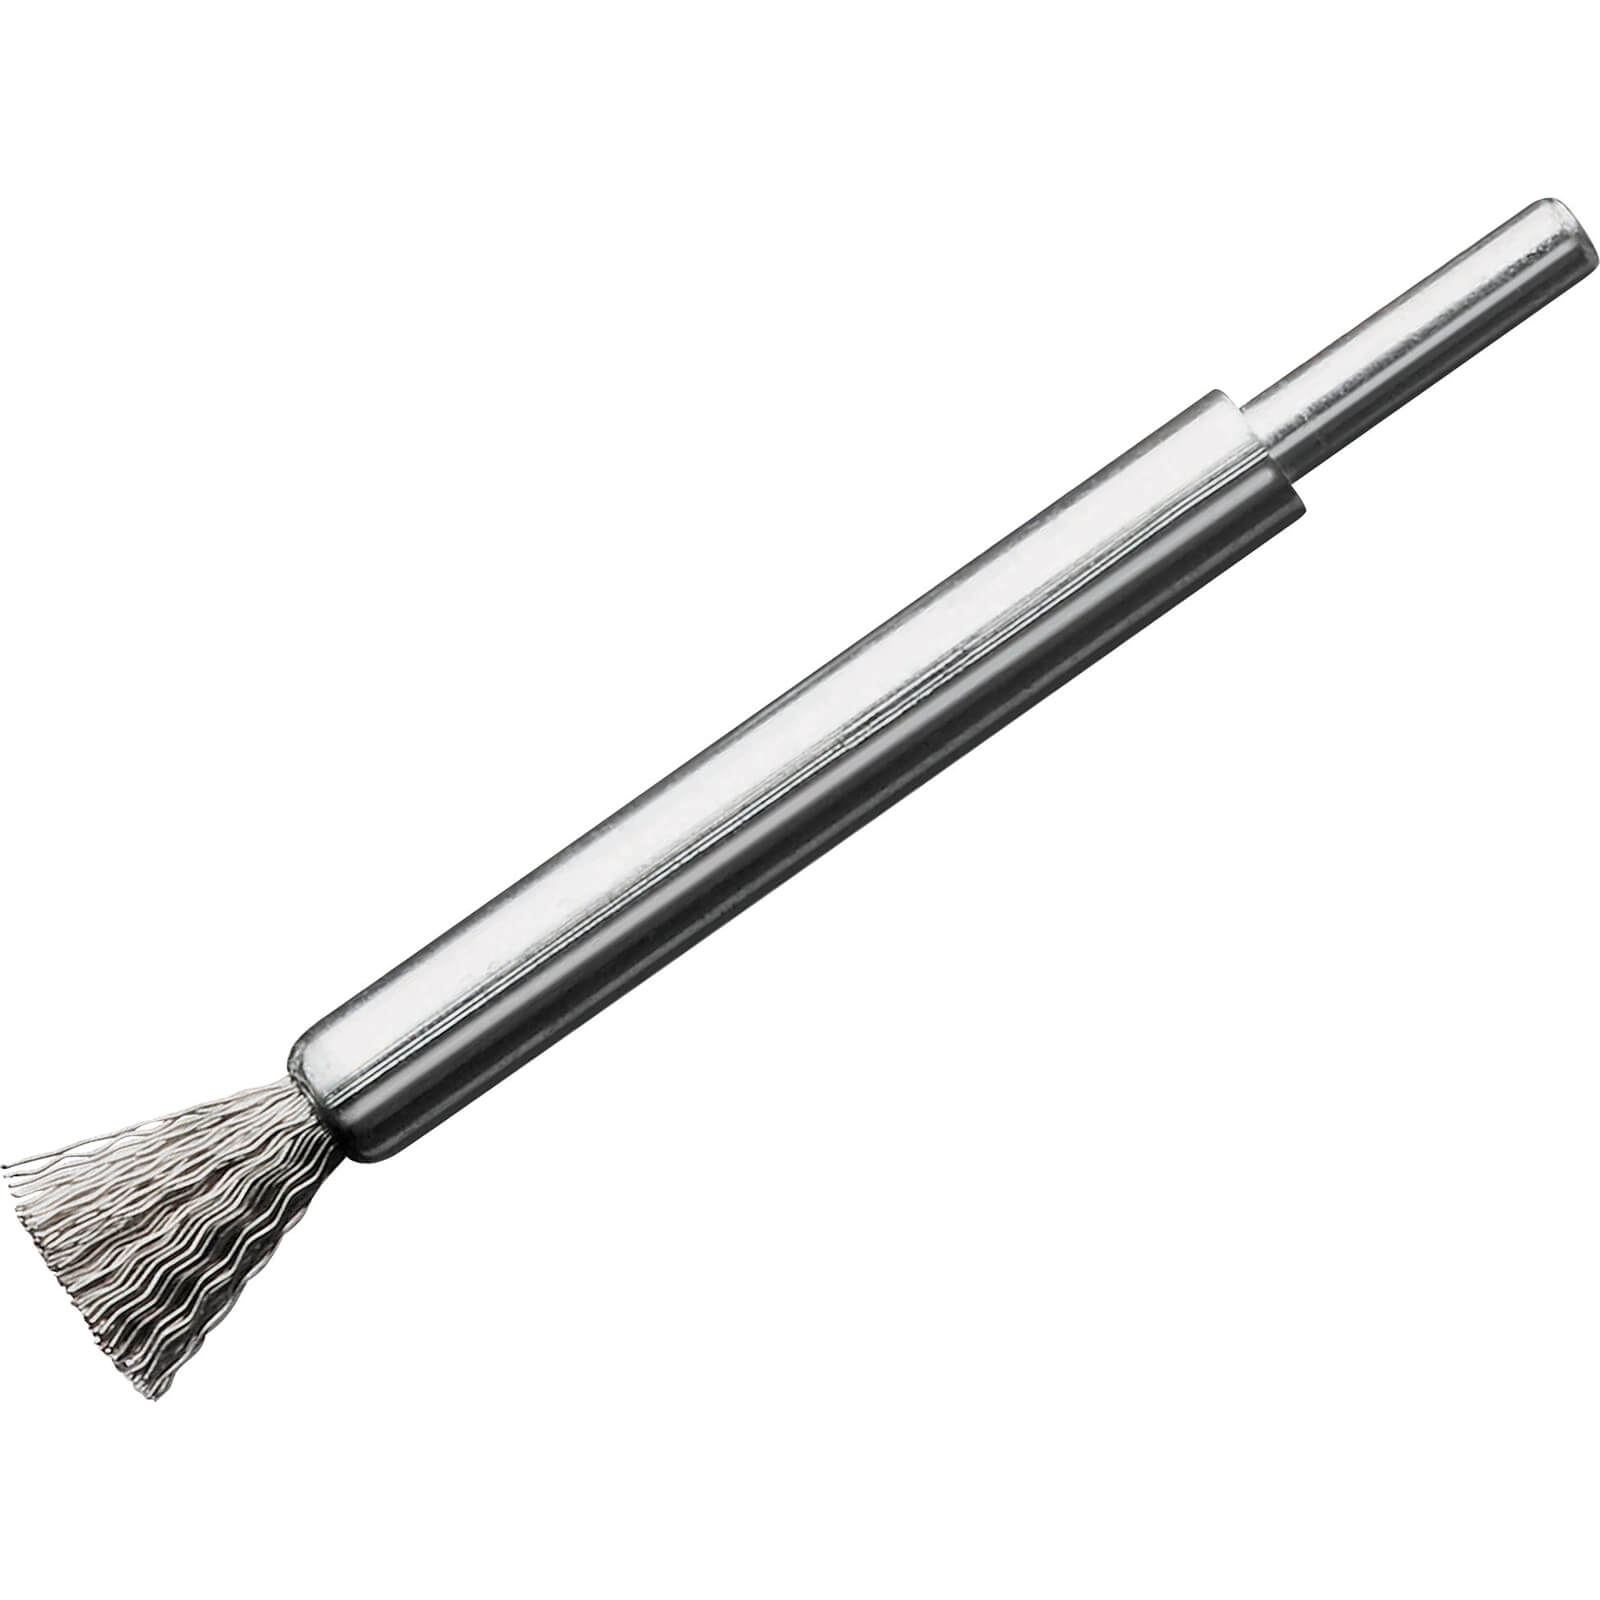 Photo of Lessmann Precision End Wire Brush 12mm 6mm Shank